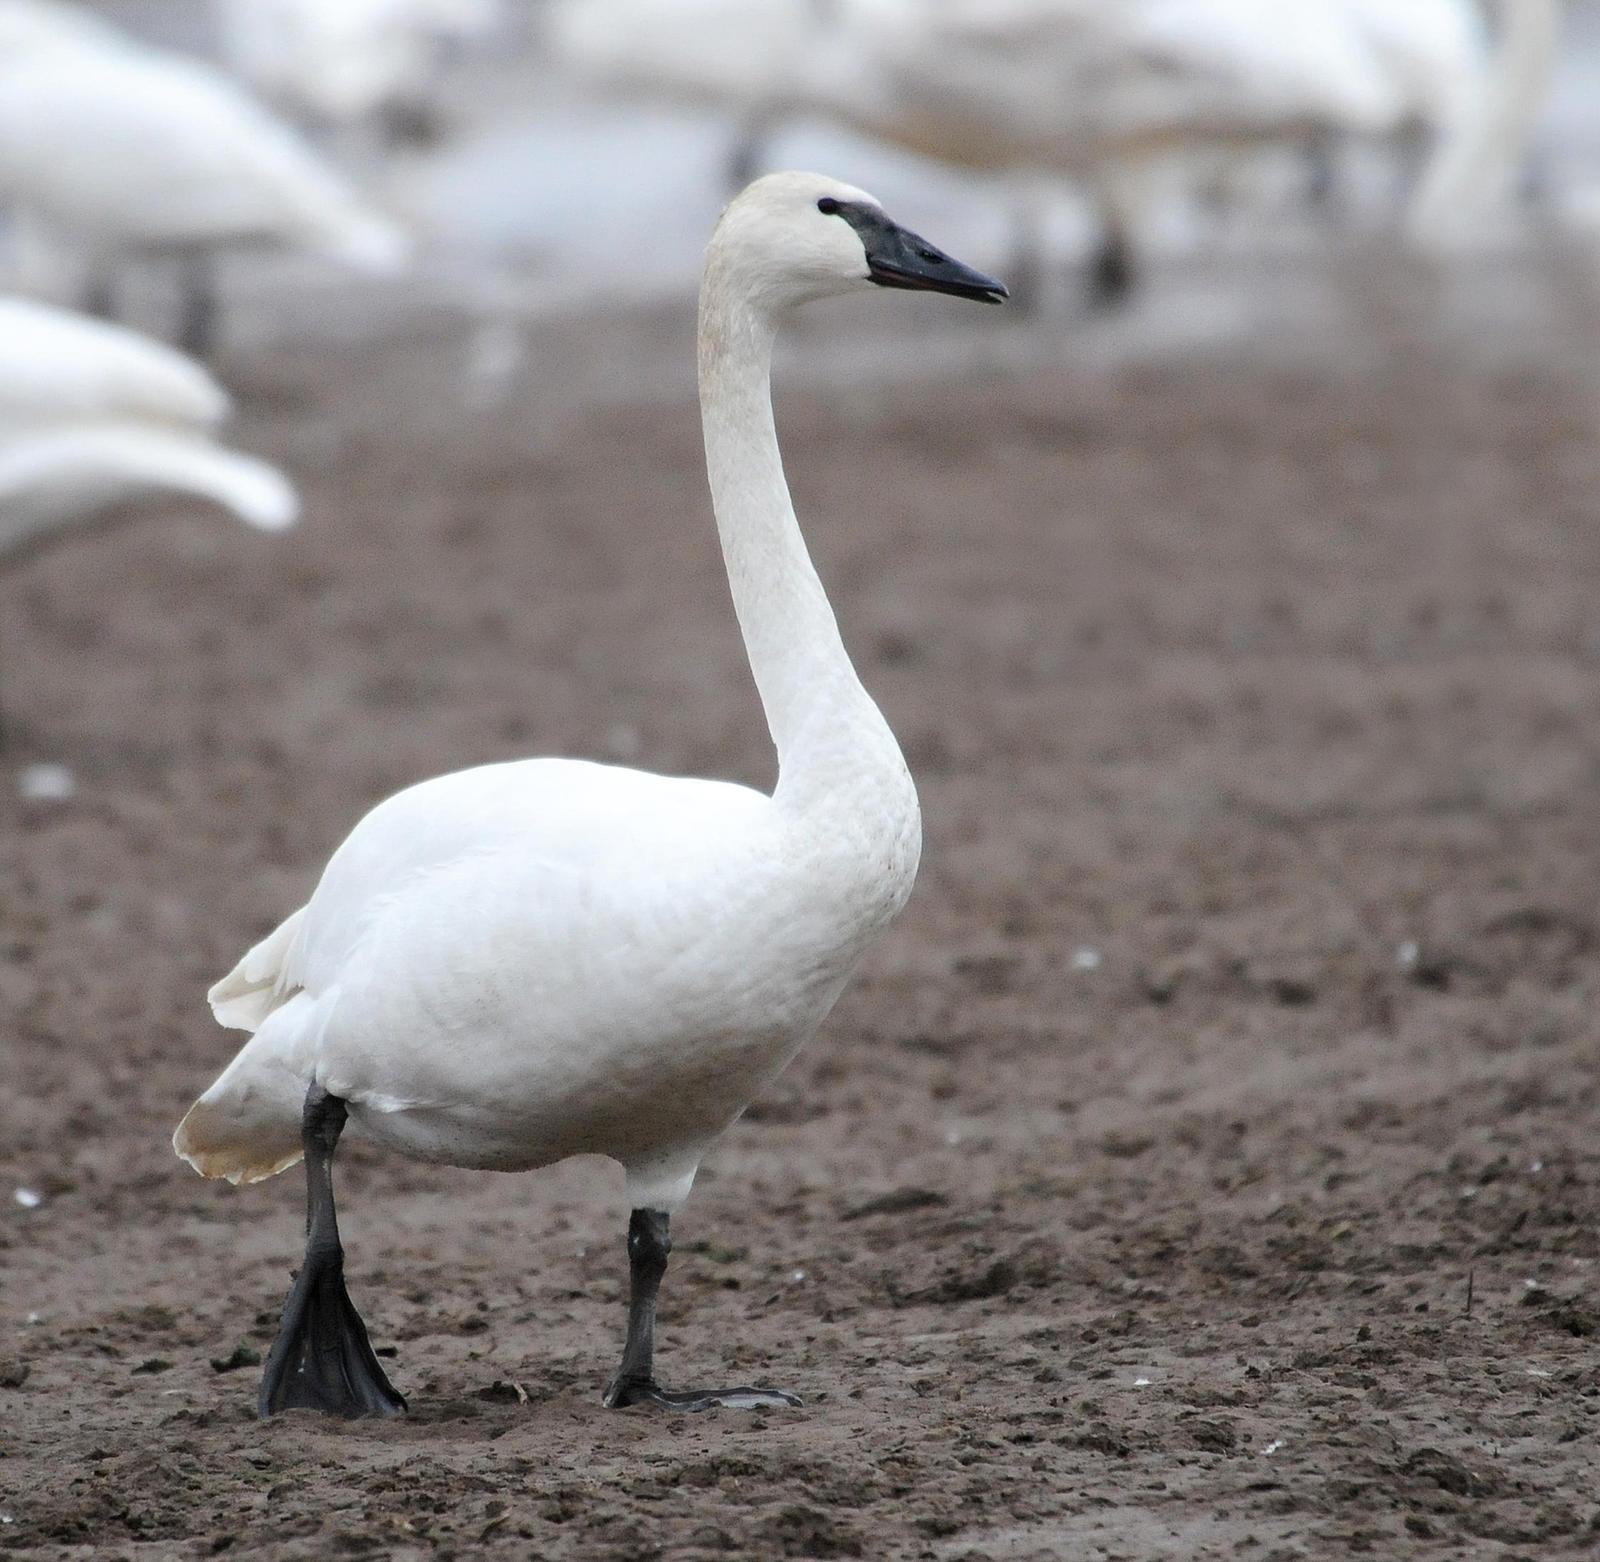 Trumpeter Swan Photo by Steven Mlodinow